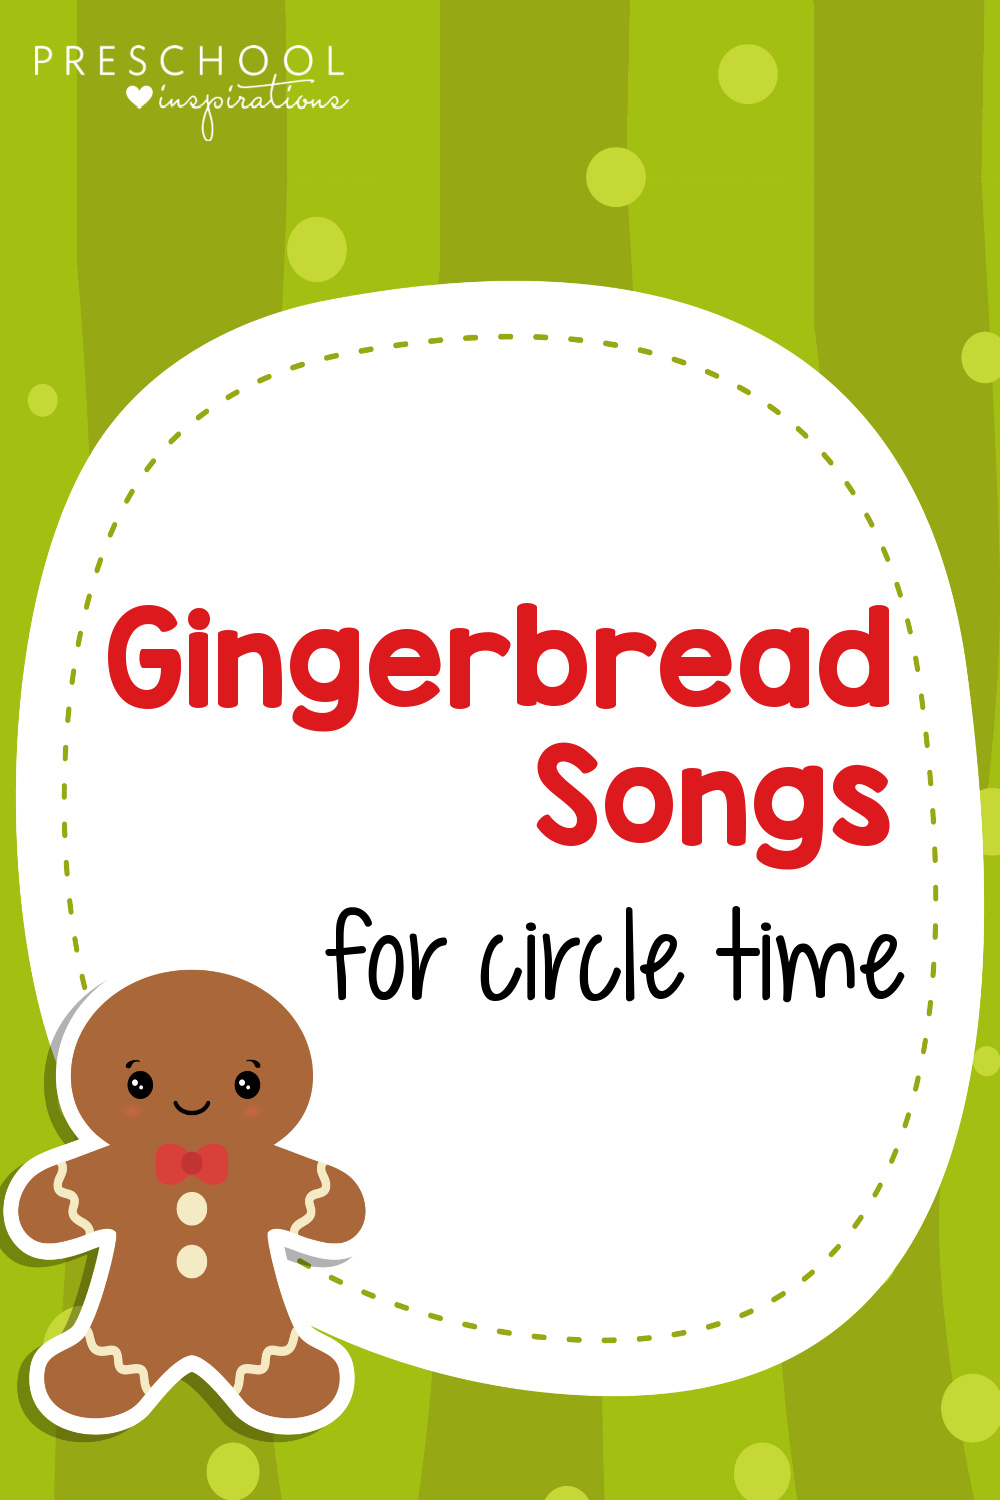 a clipart gingerbread man on a green striped background and the text gingerbread songs for circle time